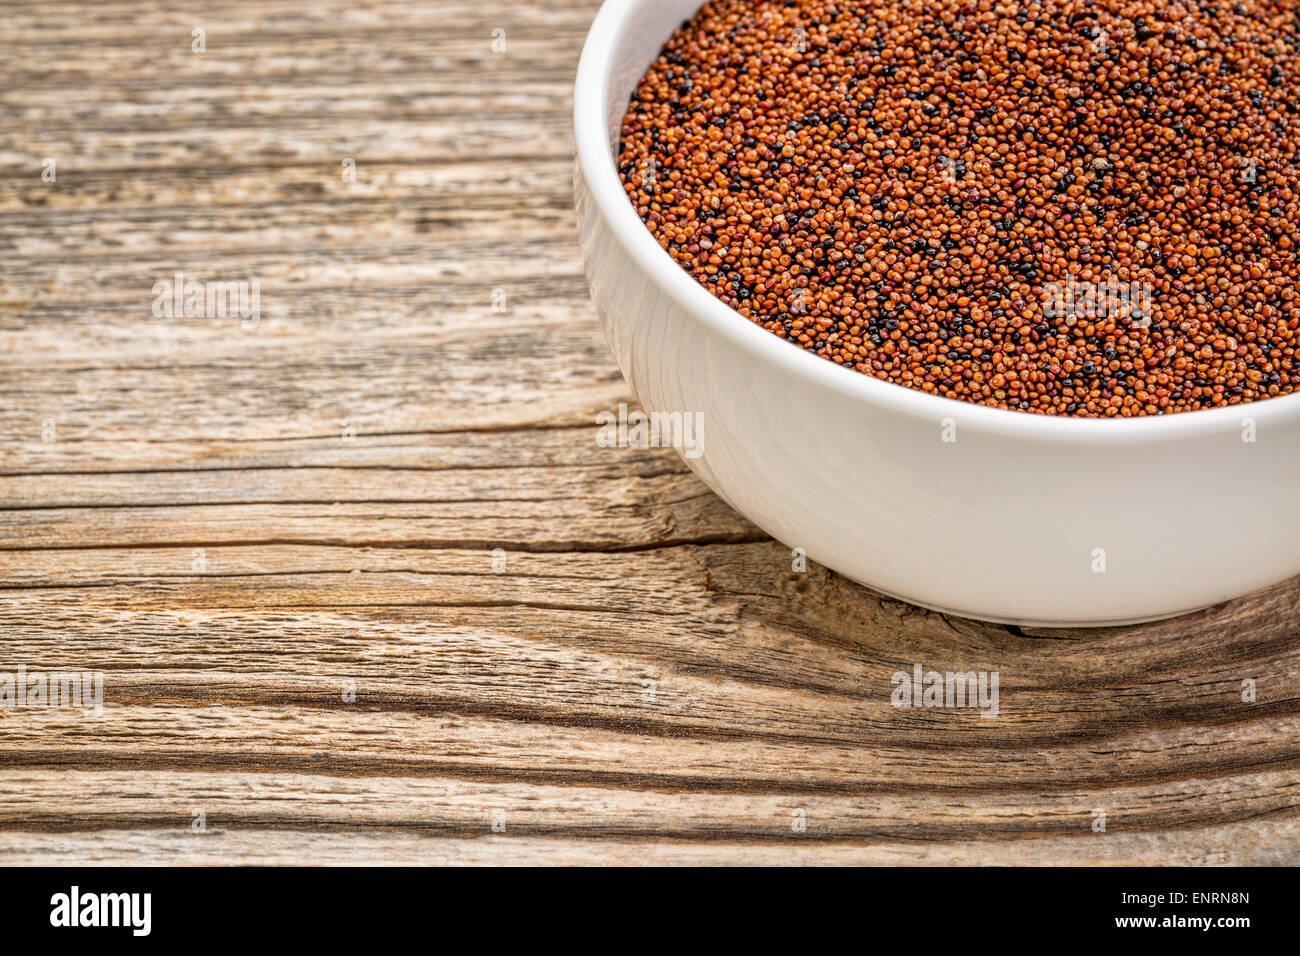 gluten free kaniwa grain (also known as baby quinoa) in a small ceramic bowl against grained wood Stock Photo